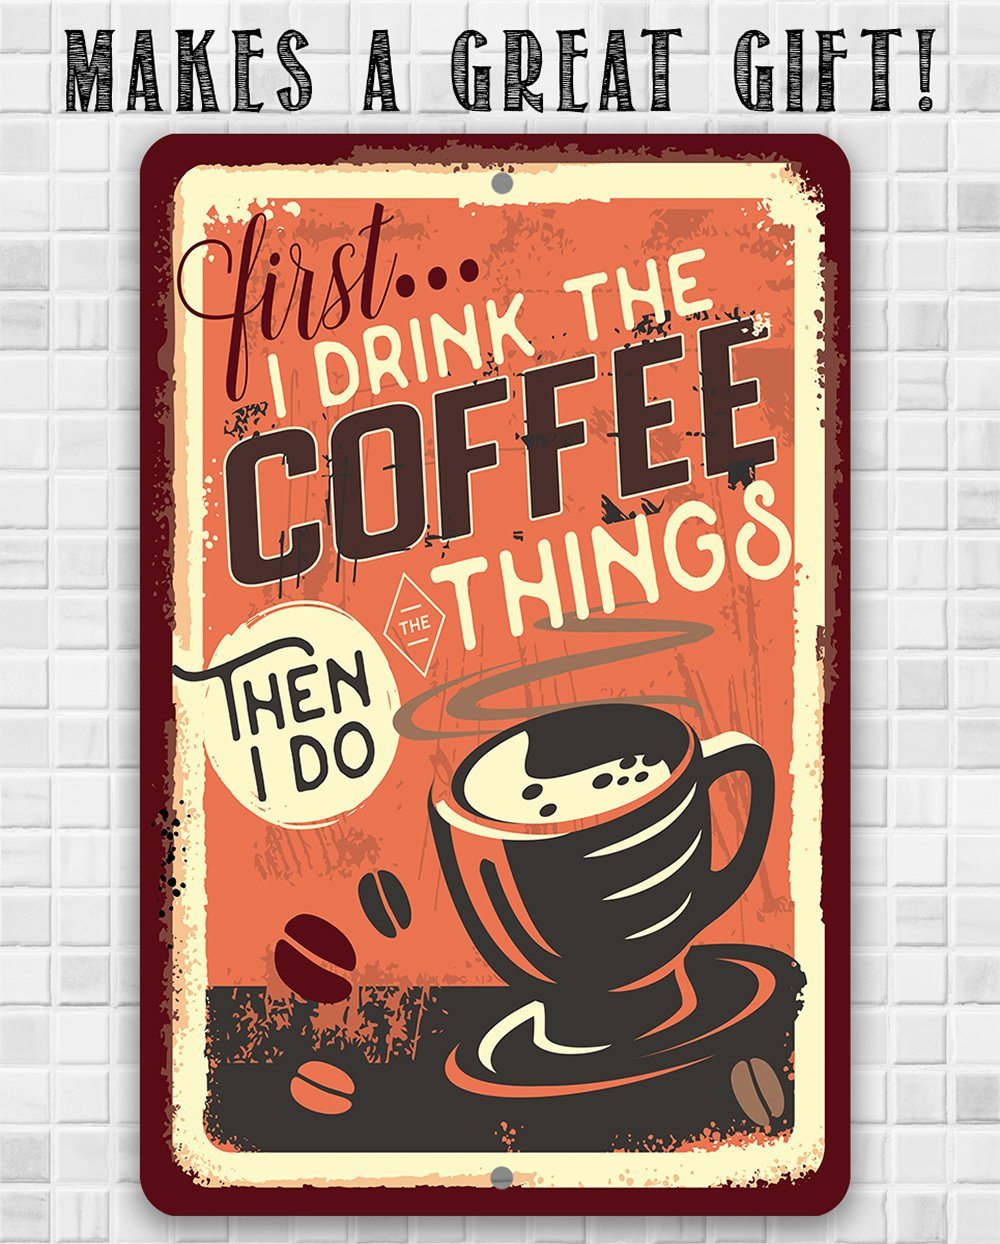 First I Drink The Coffee - Metal Sign | Lone Star Art.